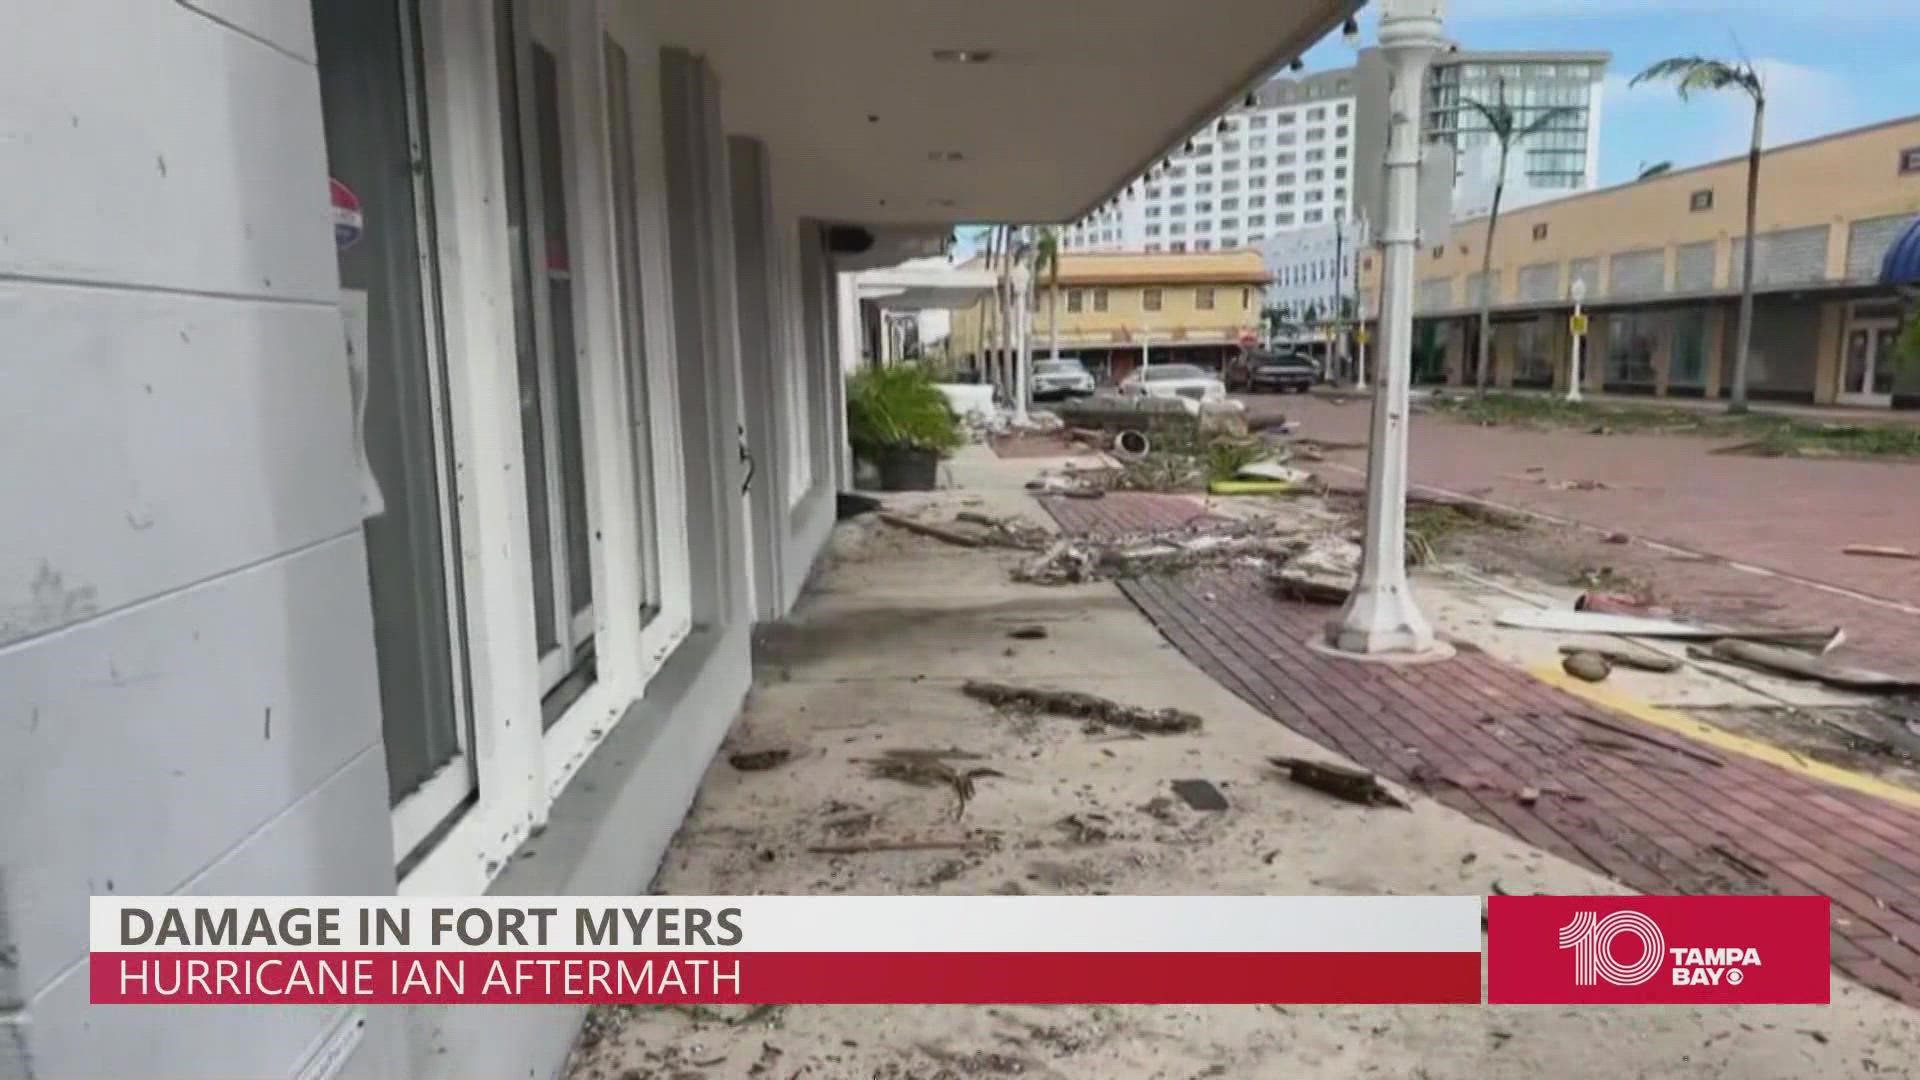 Fort Myers flooded and sustained catastrophic damage as Hurricane Ian passed through the Southwest Florida city.